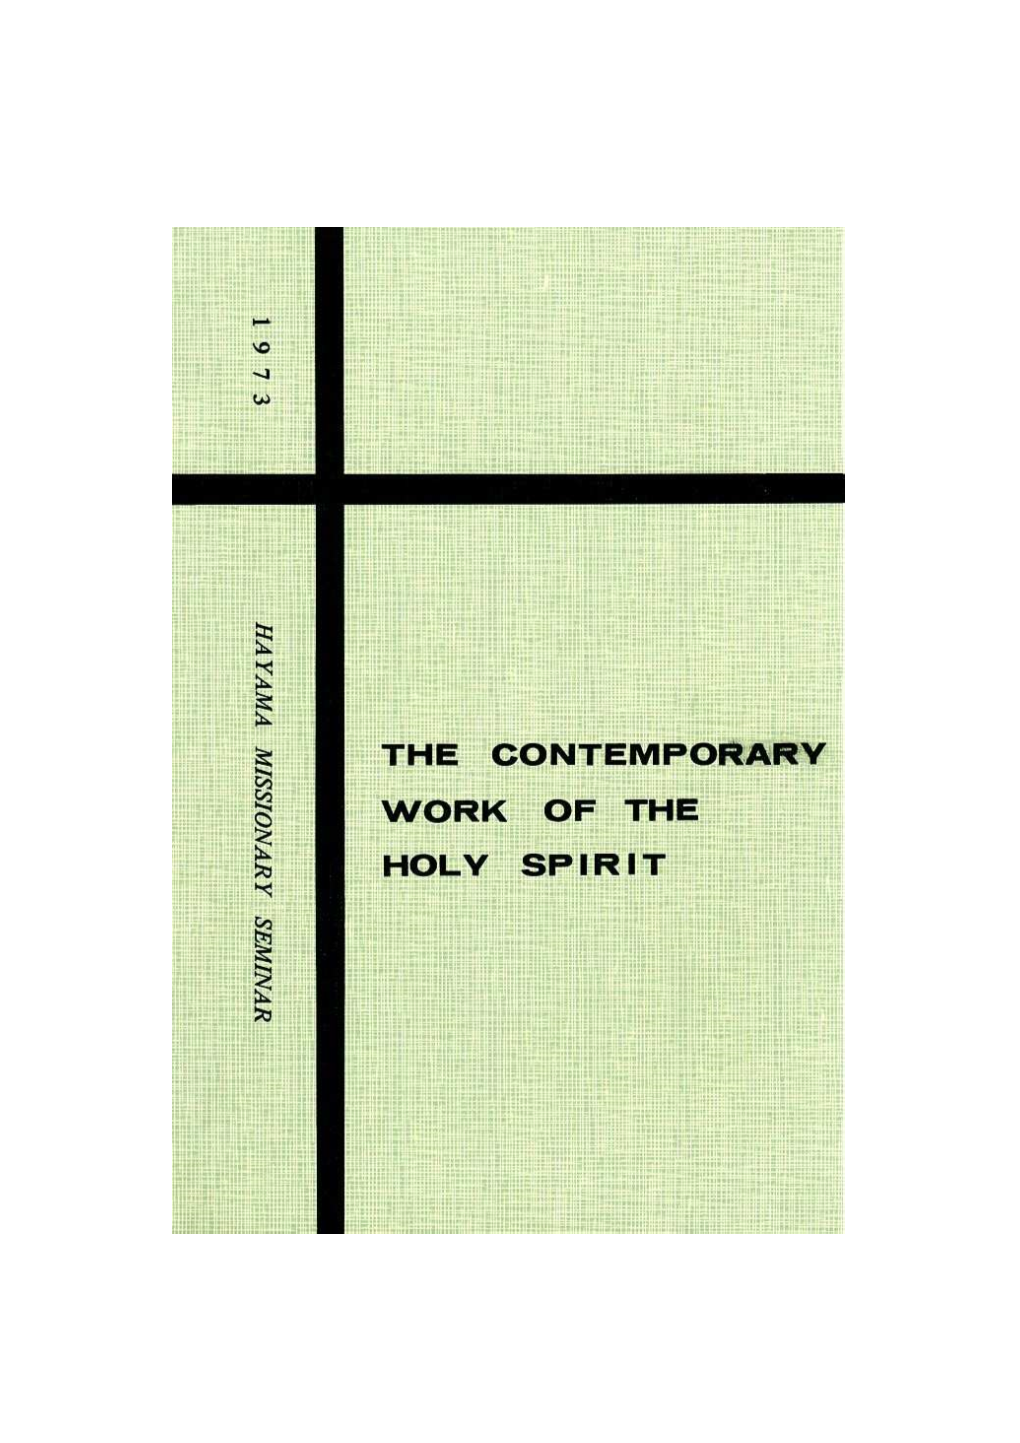 The Contemporary Work of the Holy Spirit"